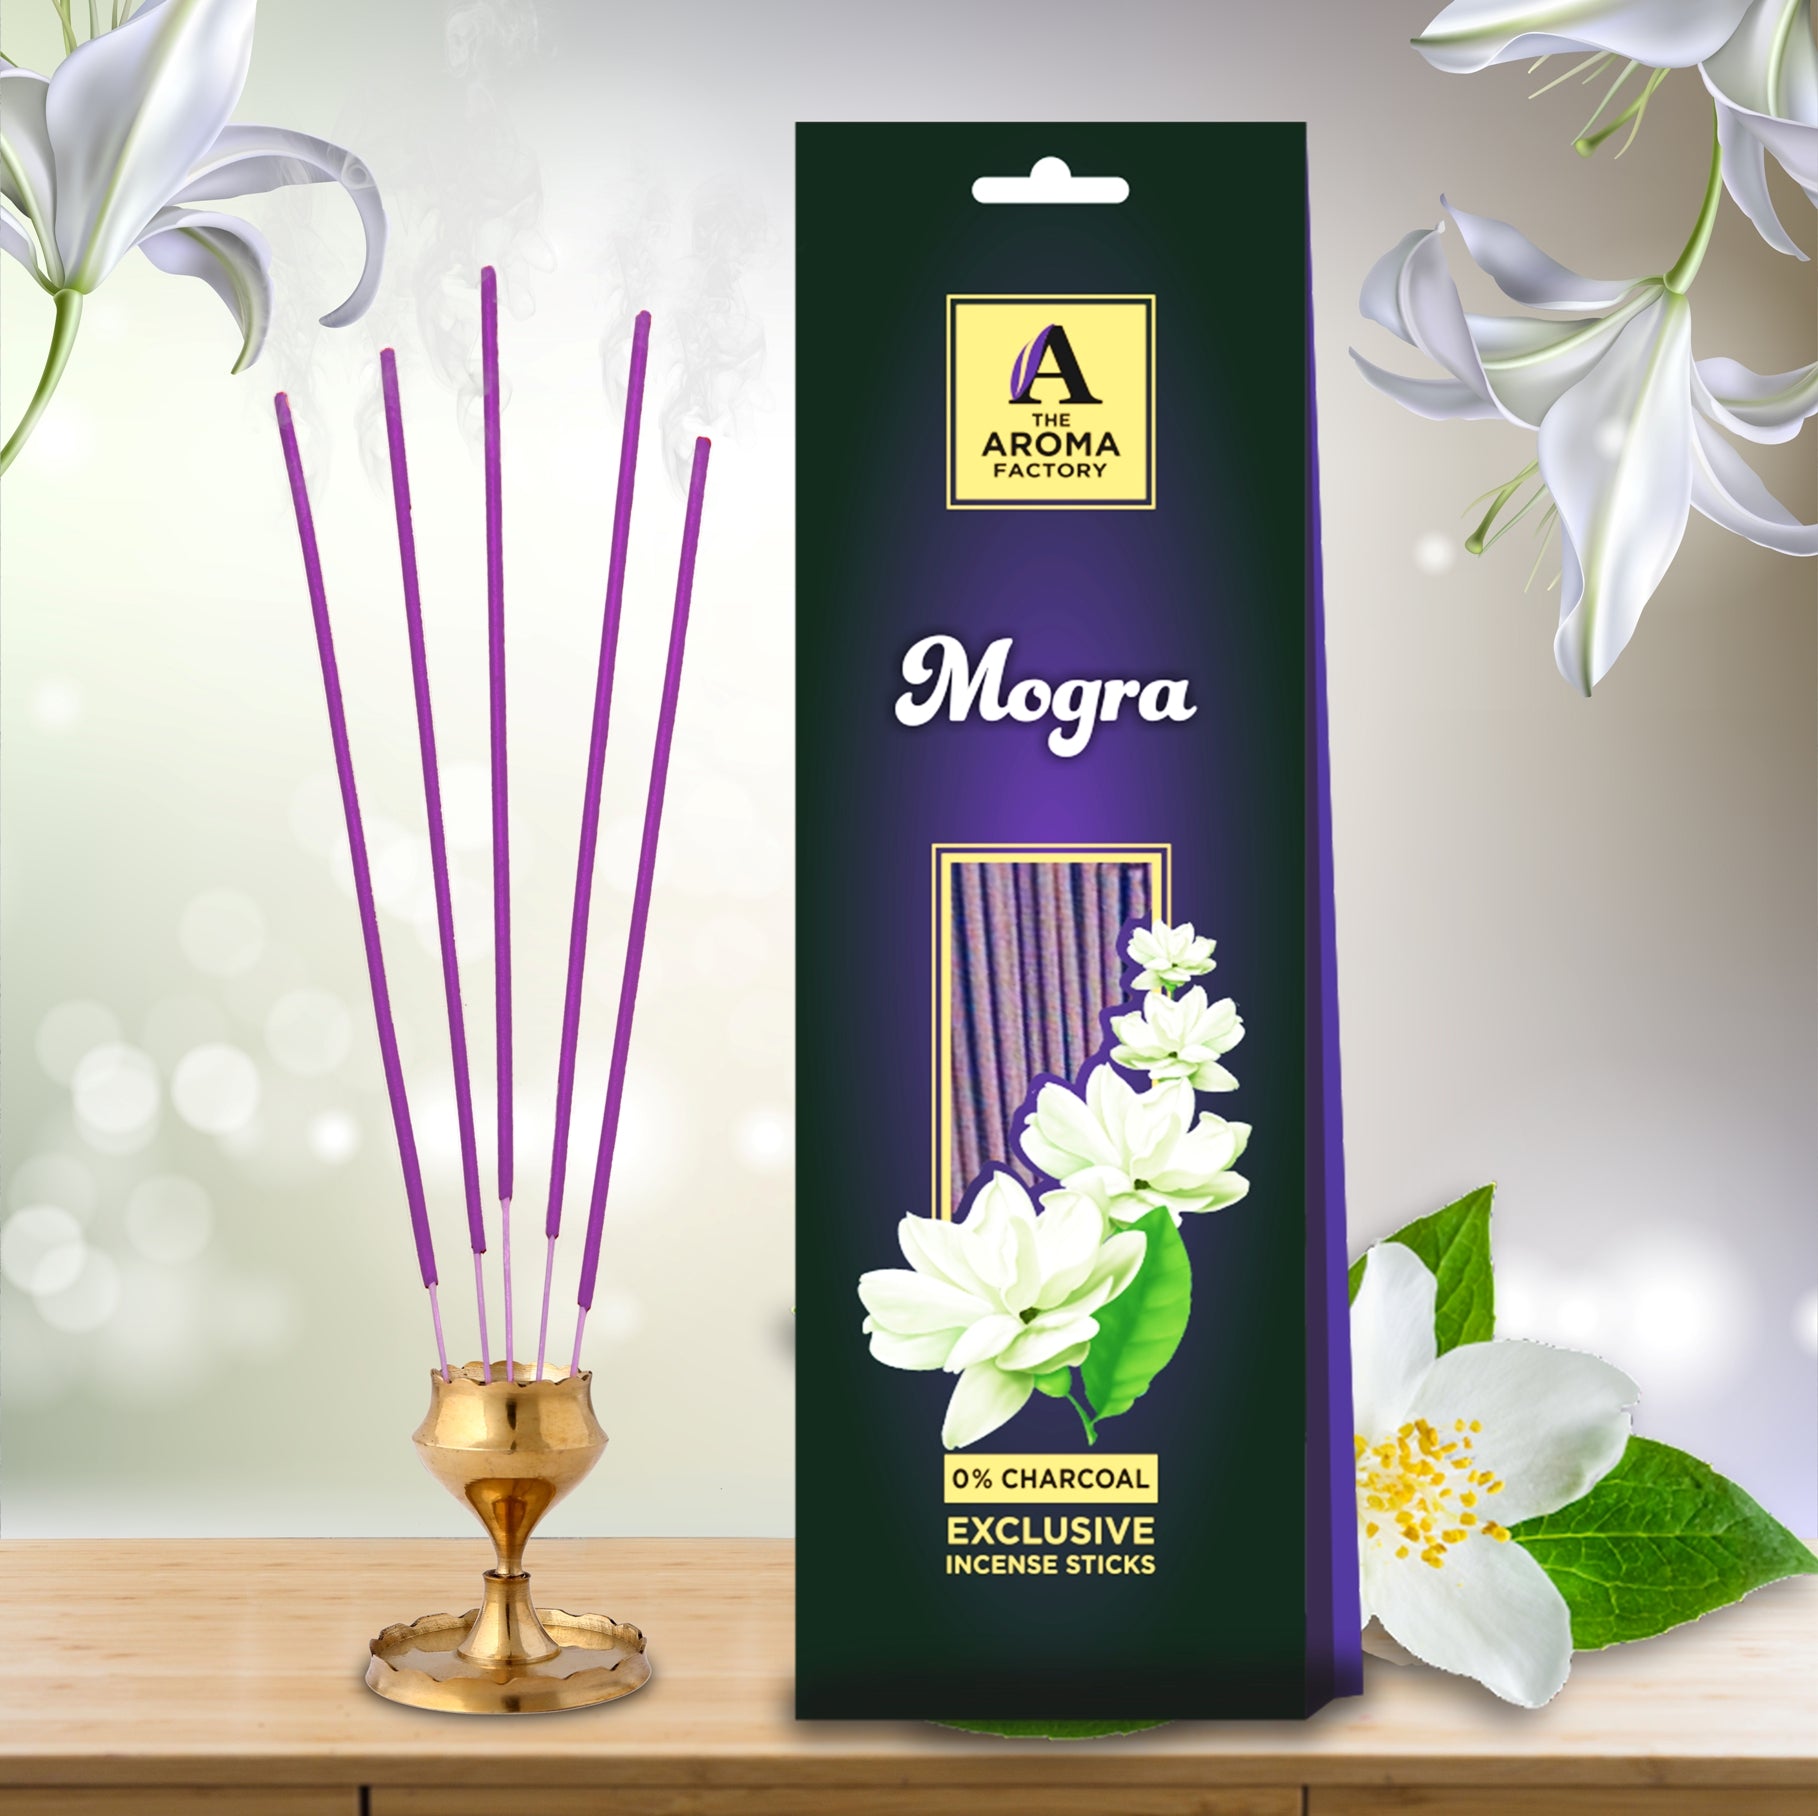 The Aroma Factory Mogra Agarbatti Incense Stick, No Charcoal & 100% Herbal (Pack of 30)